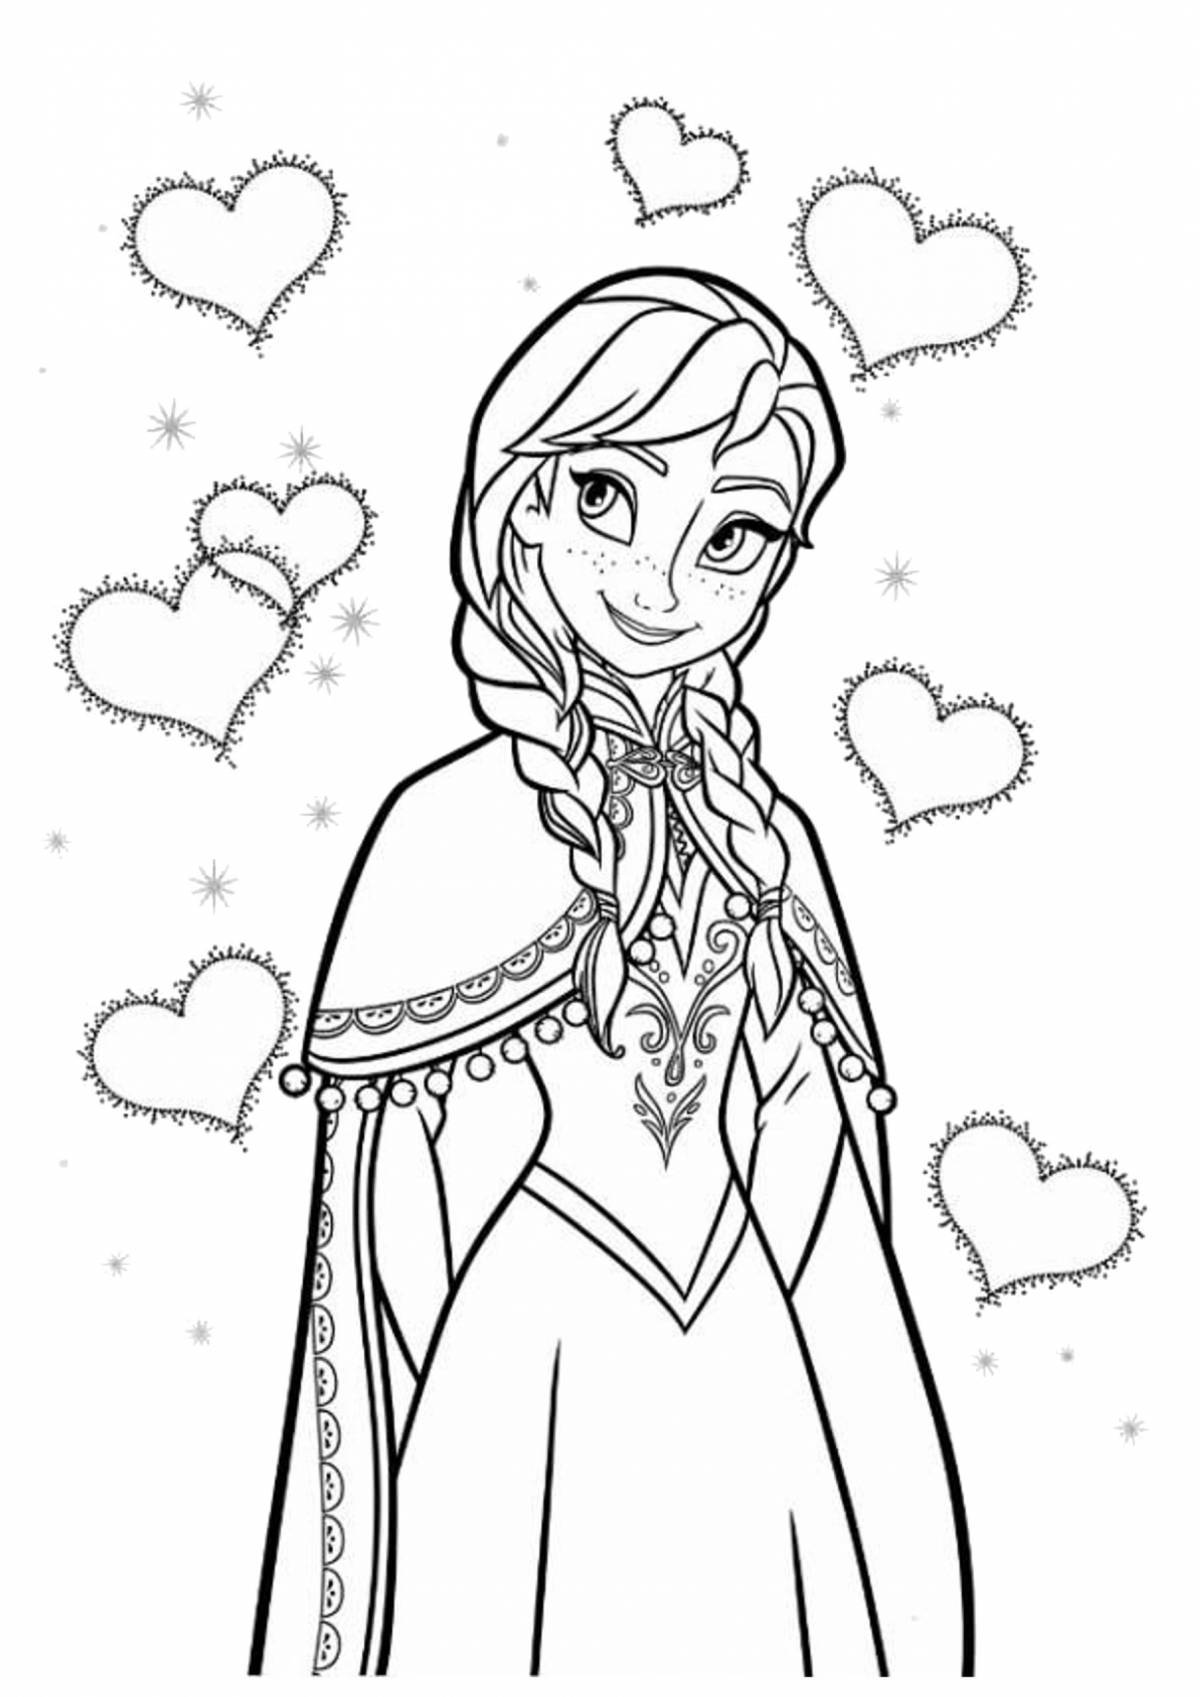 Elsa and anna amazing coloring book for kids